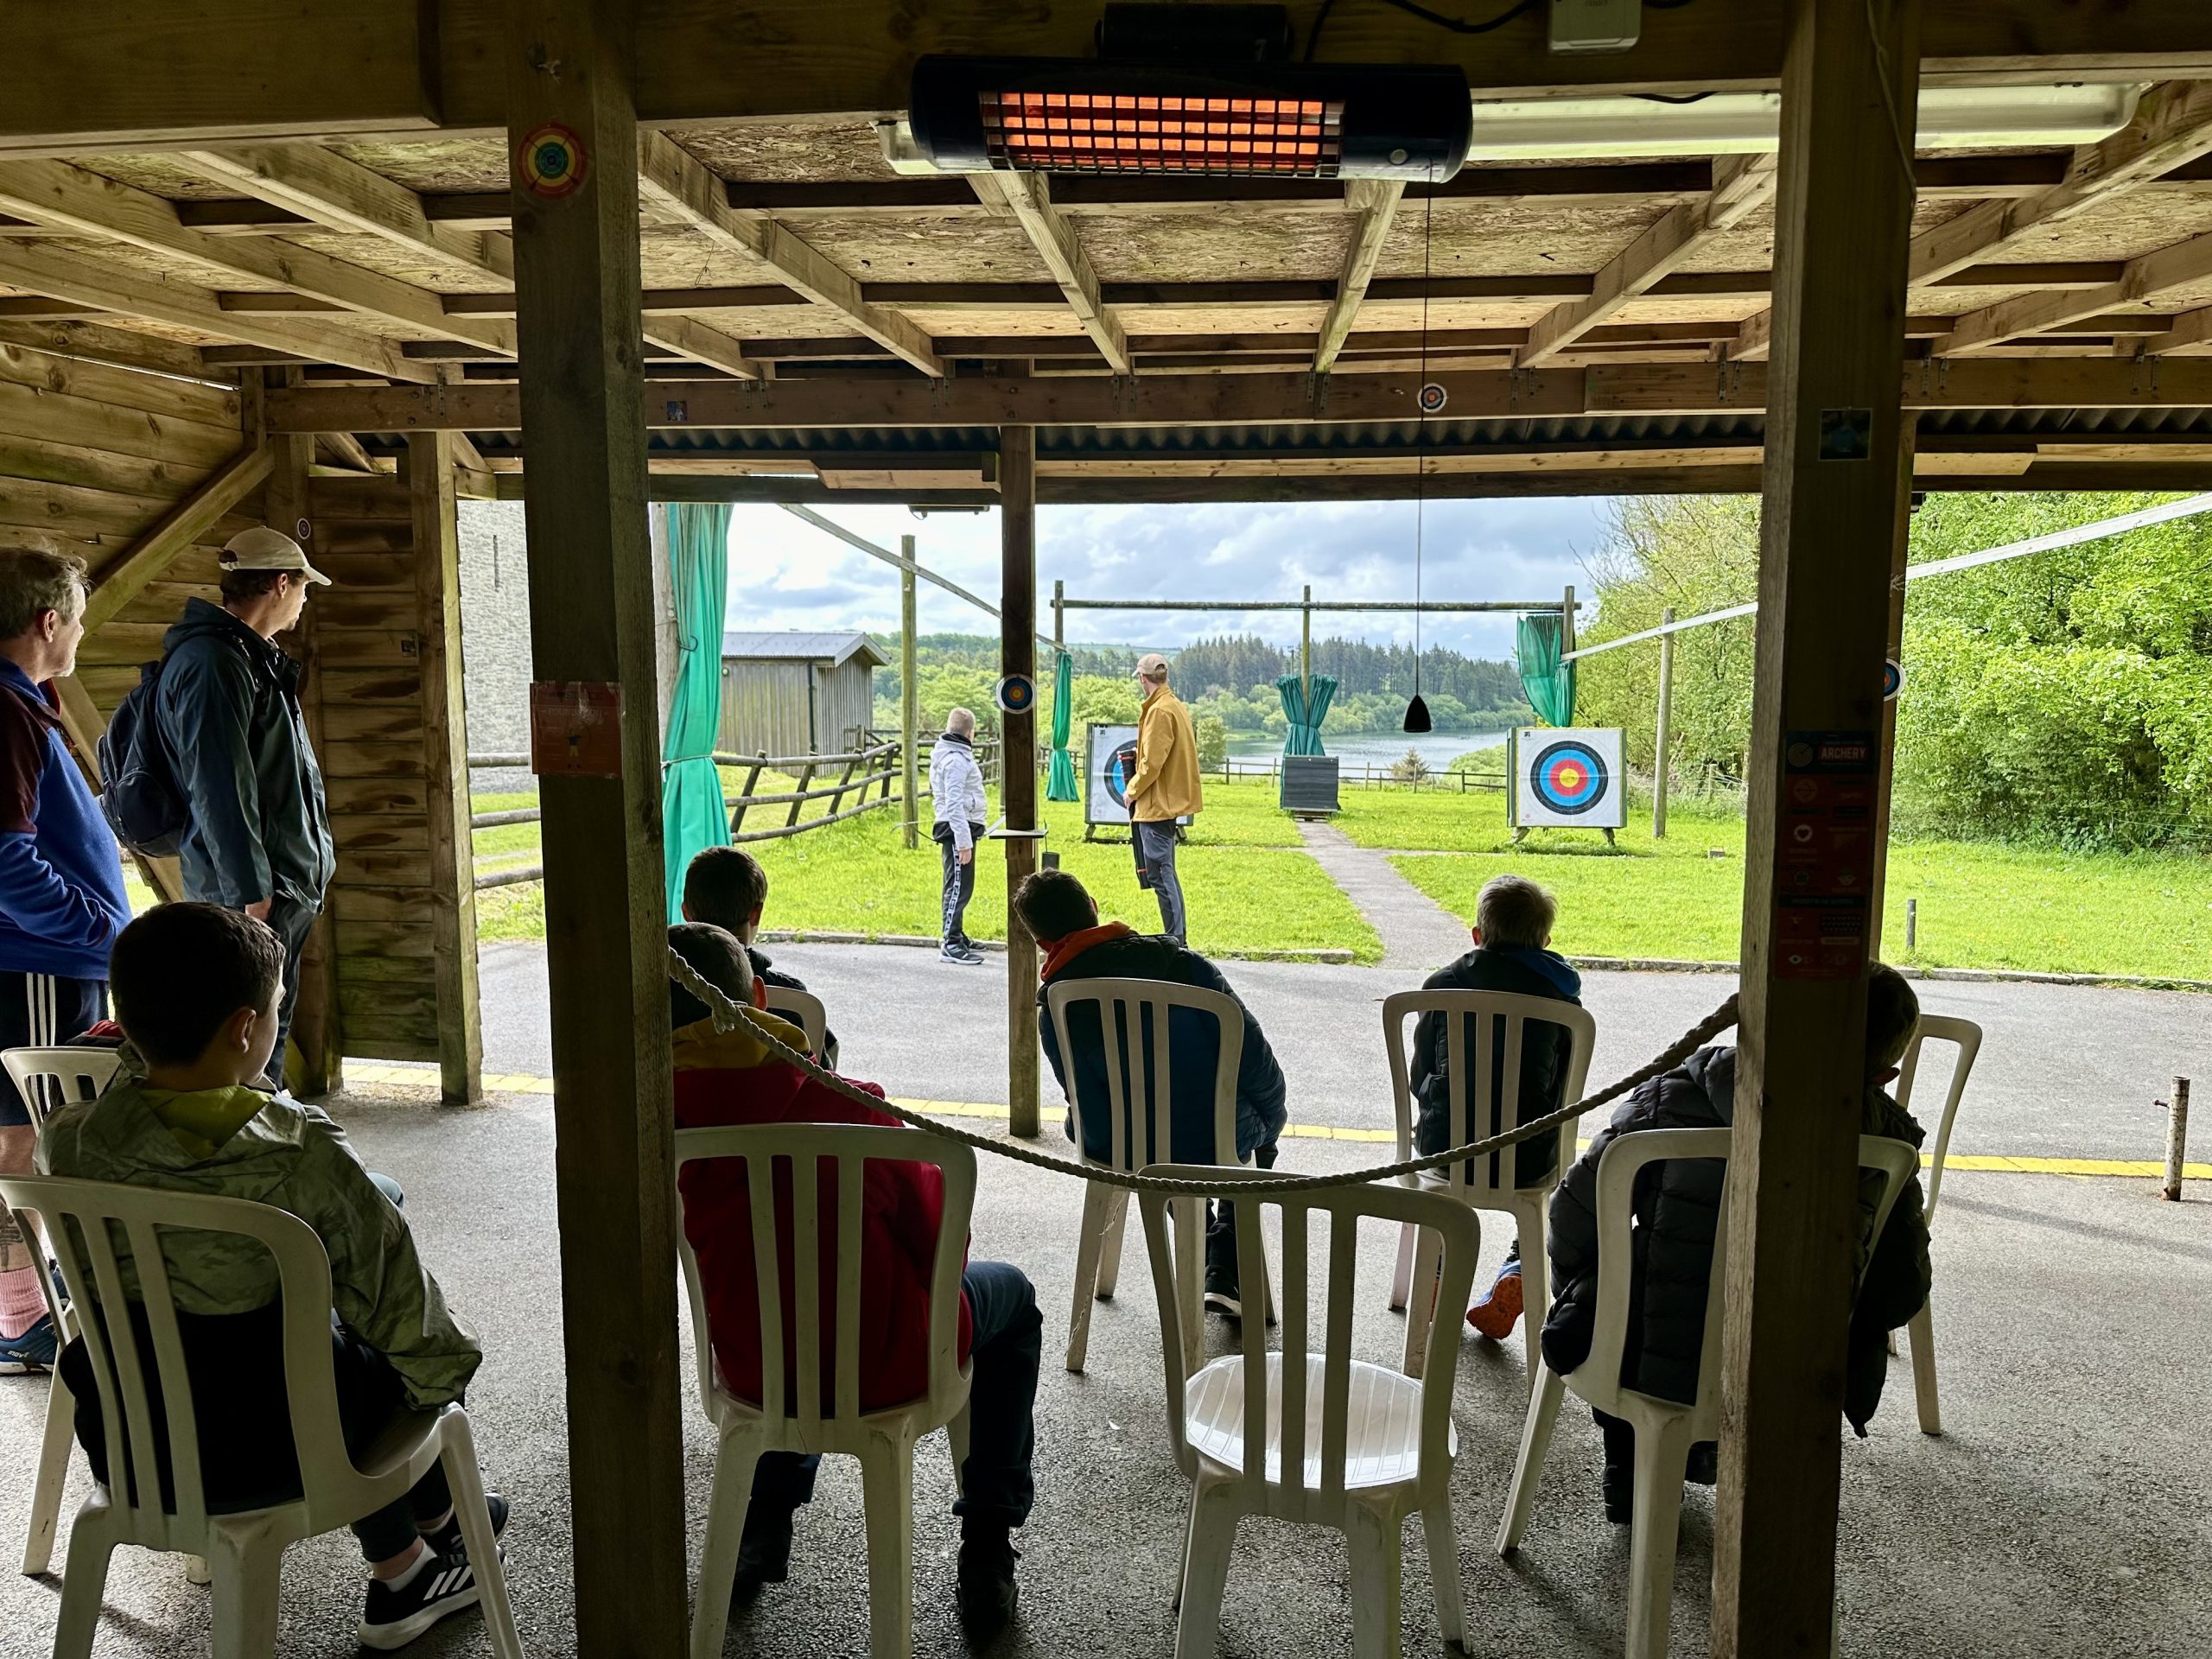 A collection of white plastic chairs have young guests sitting facing away from the camera, looking out at the archery range in the background, where a Calvert Exmoor instructor is teaching a young guest how to shoot and arrow with a bow.